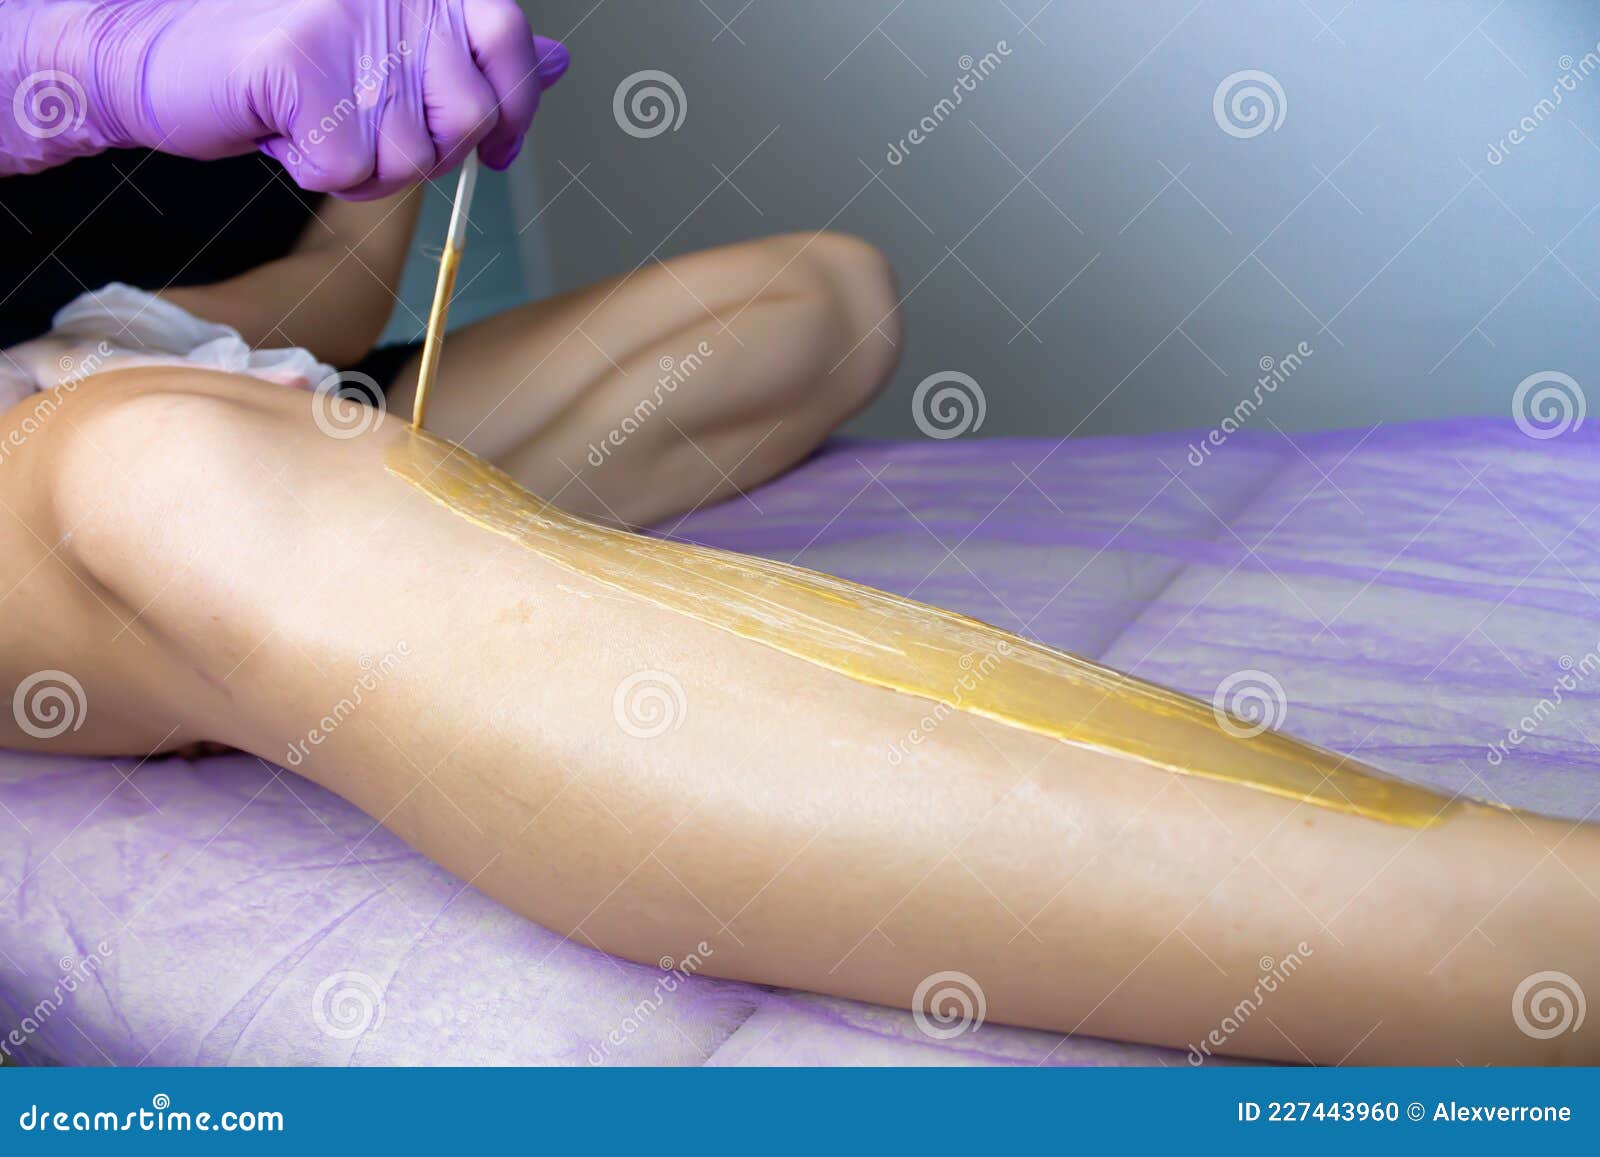 hair removal with wax. shugaring. wax depilation.